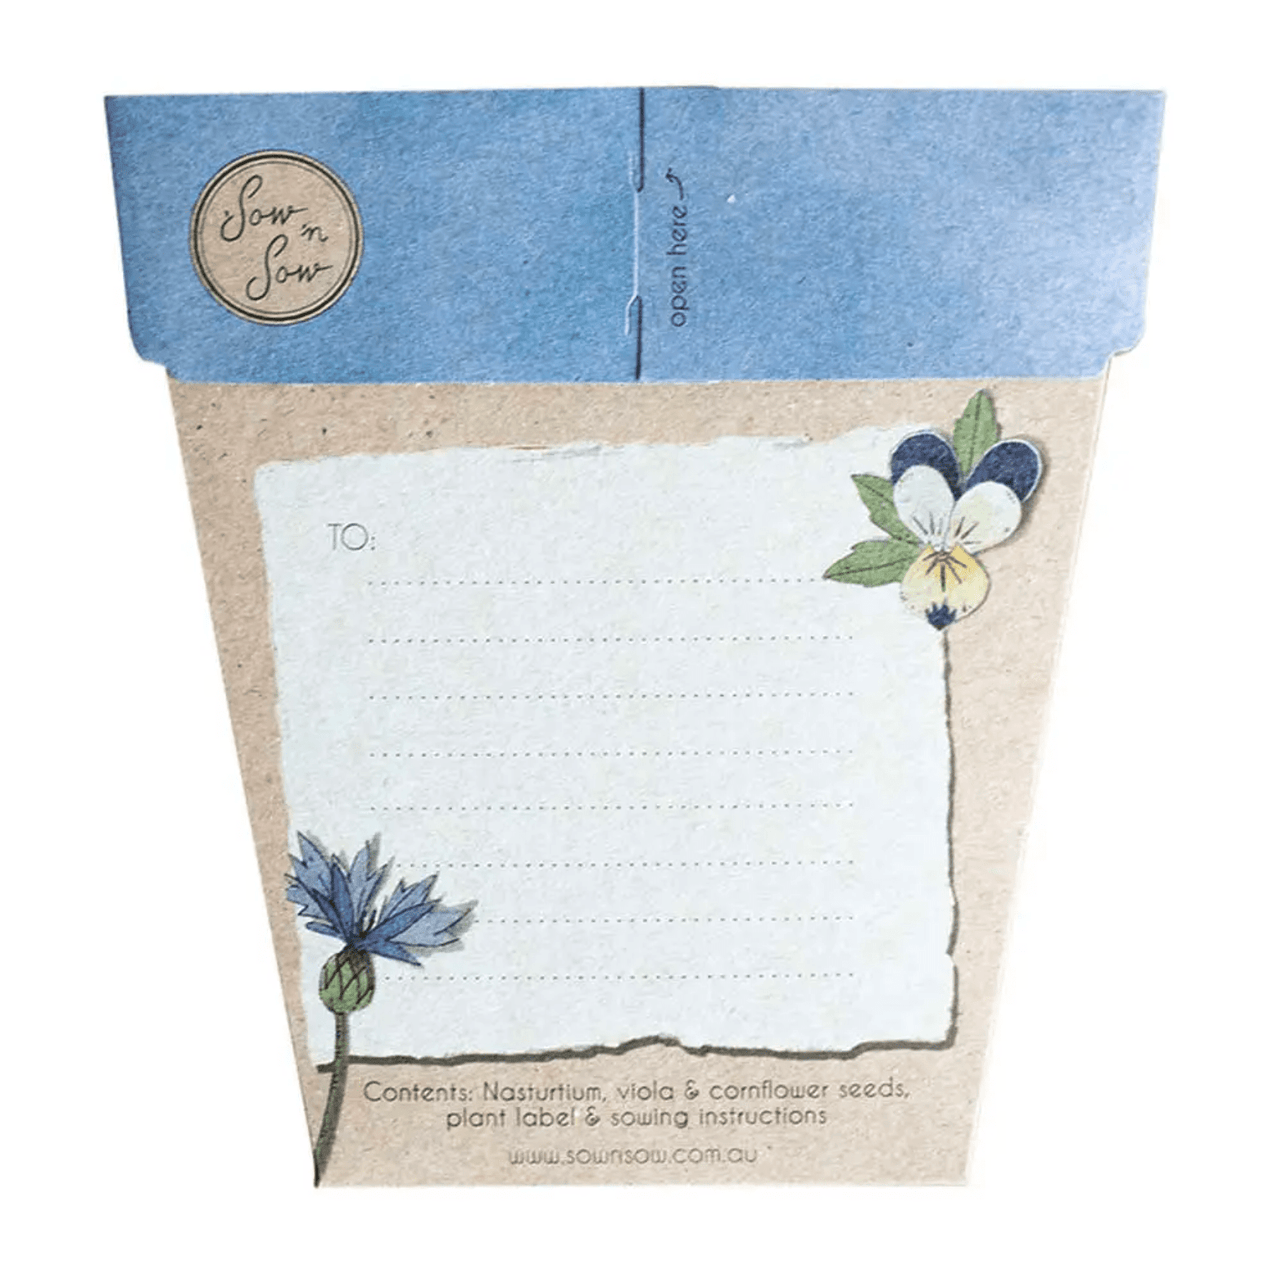 A blue flower pot with a note inside containing Seeds - Culinary Flowers by Sow n Sow.